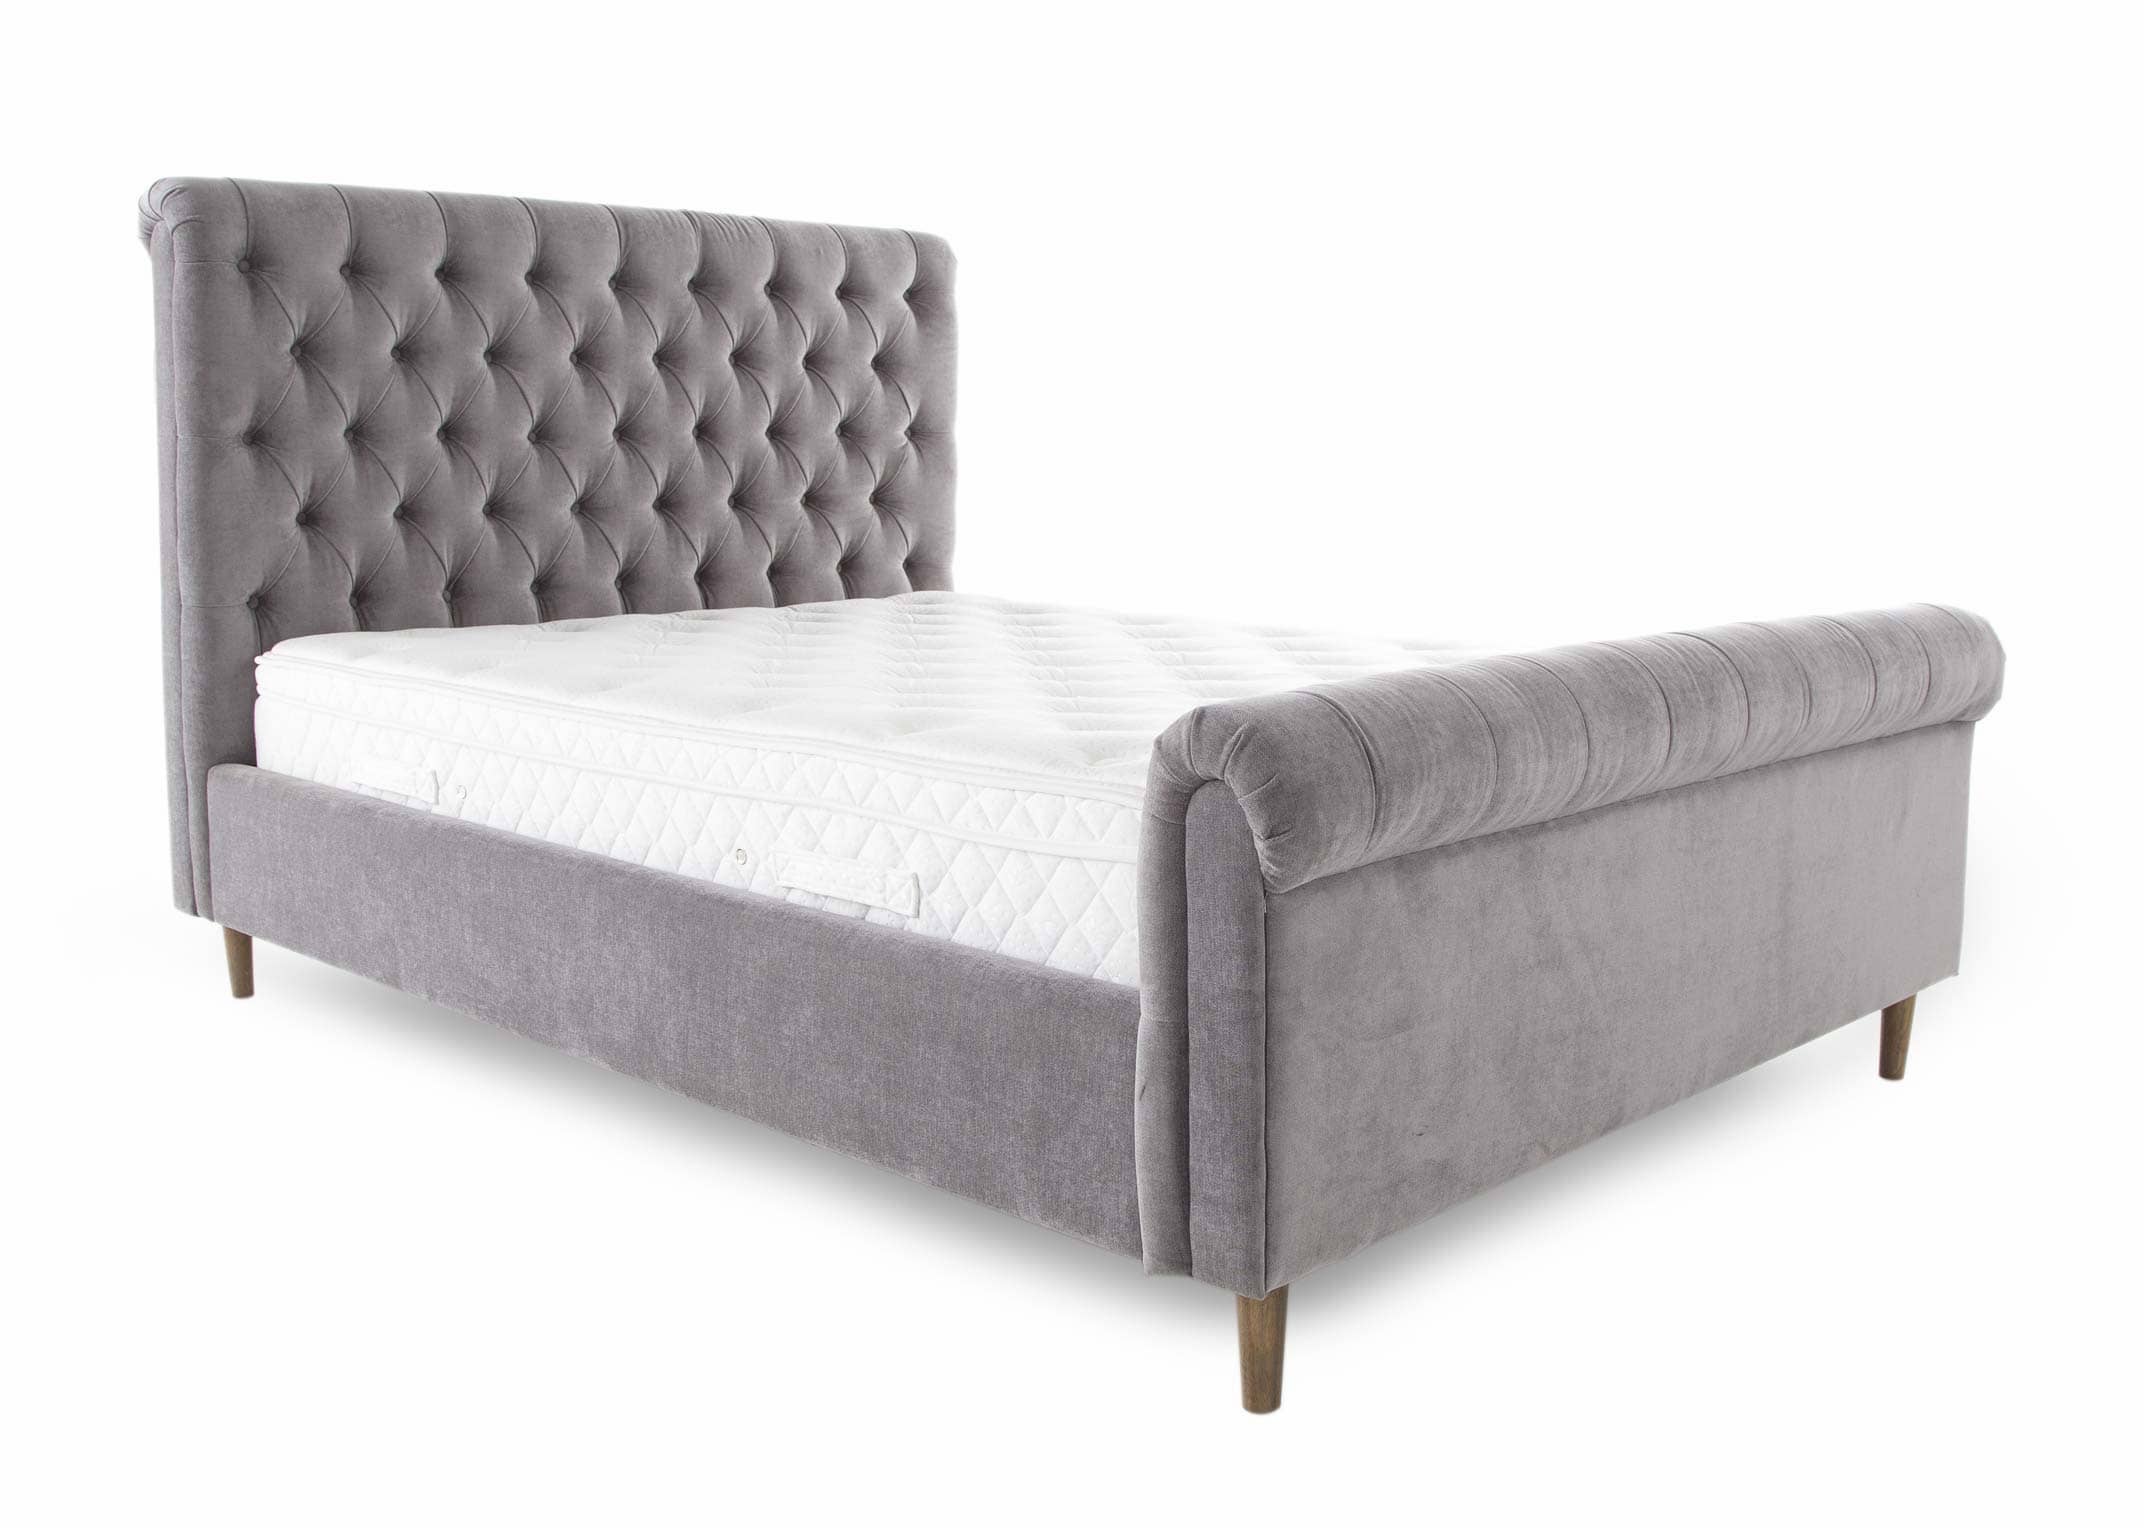 King Size 5ft Grey Fabric Bed Frame, Grey Fabric King Size Bed Frame